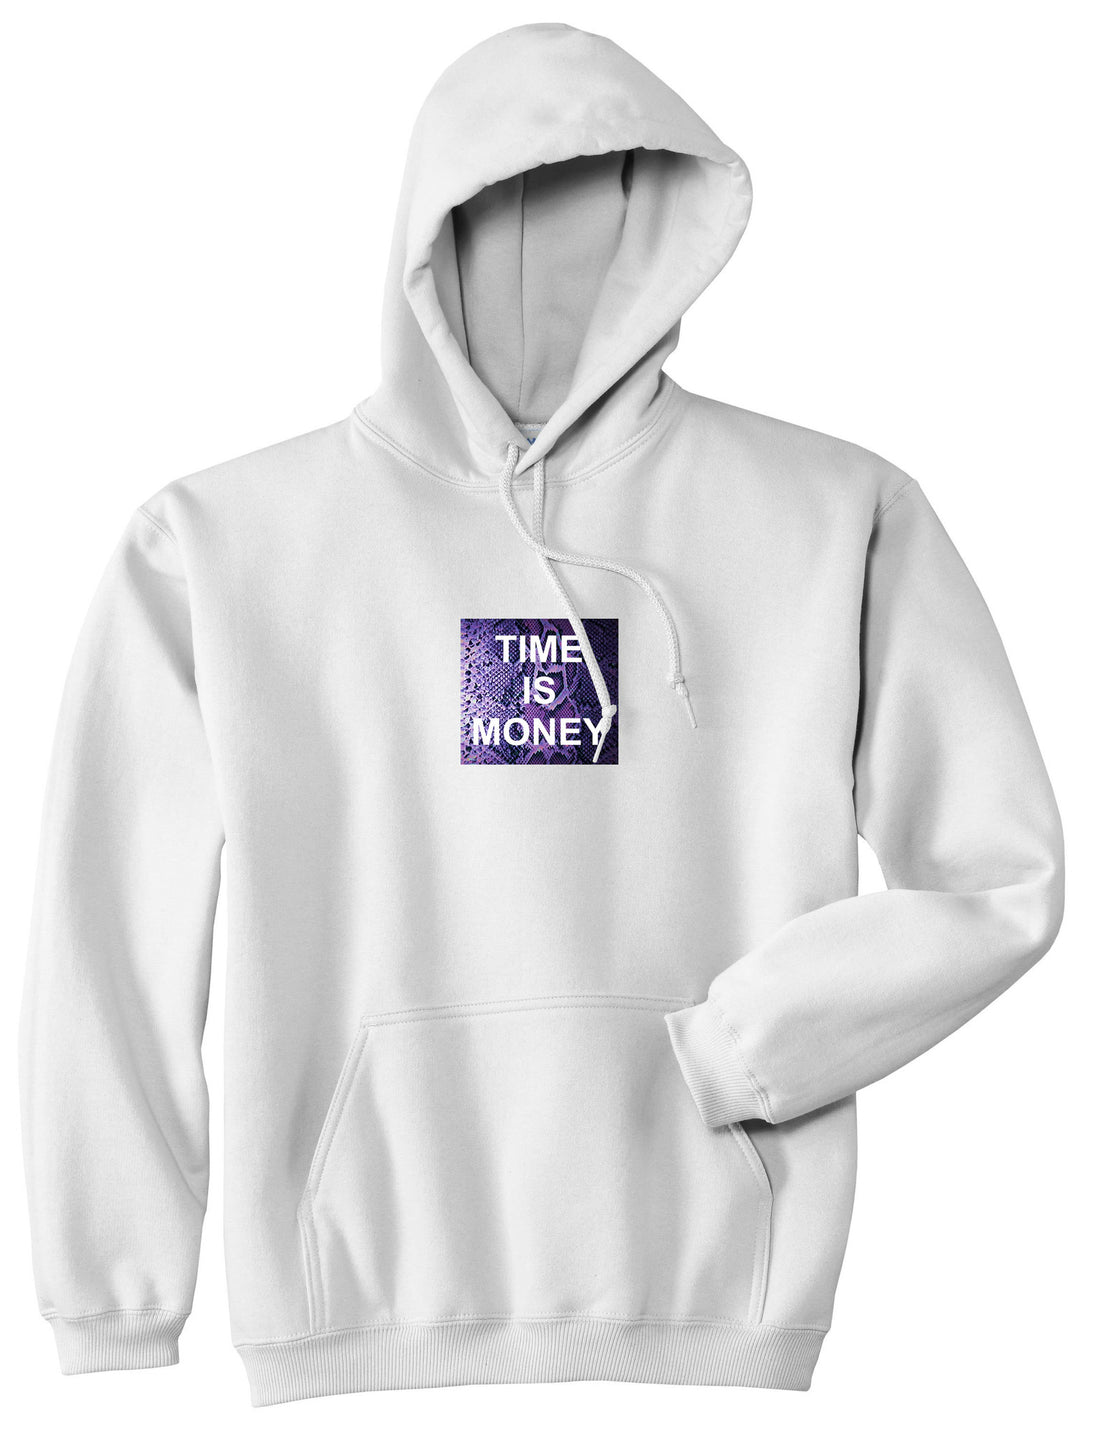 Time Is Money Snakesin Print Pullover Hoodie in White By Kings Of NY